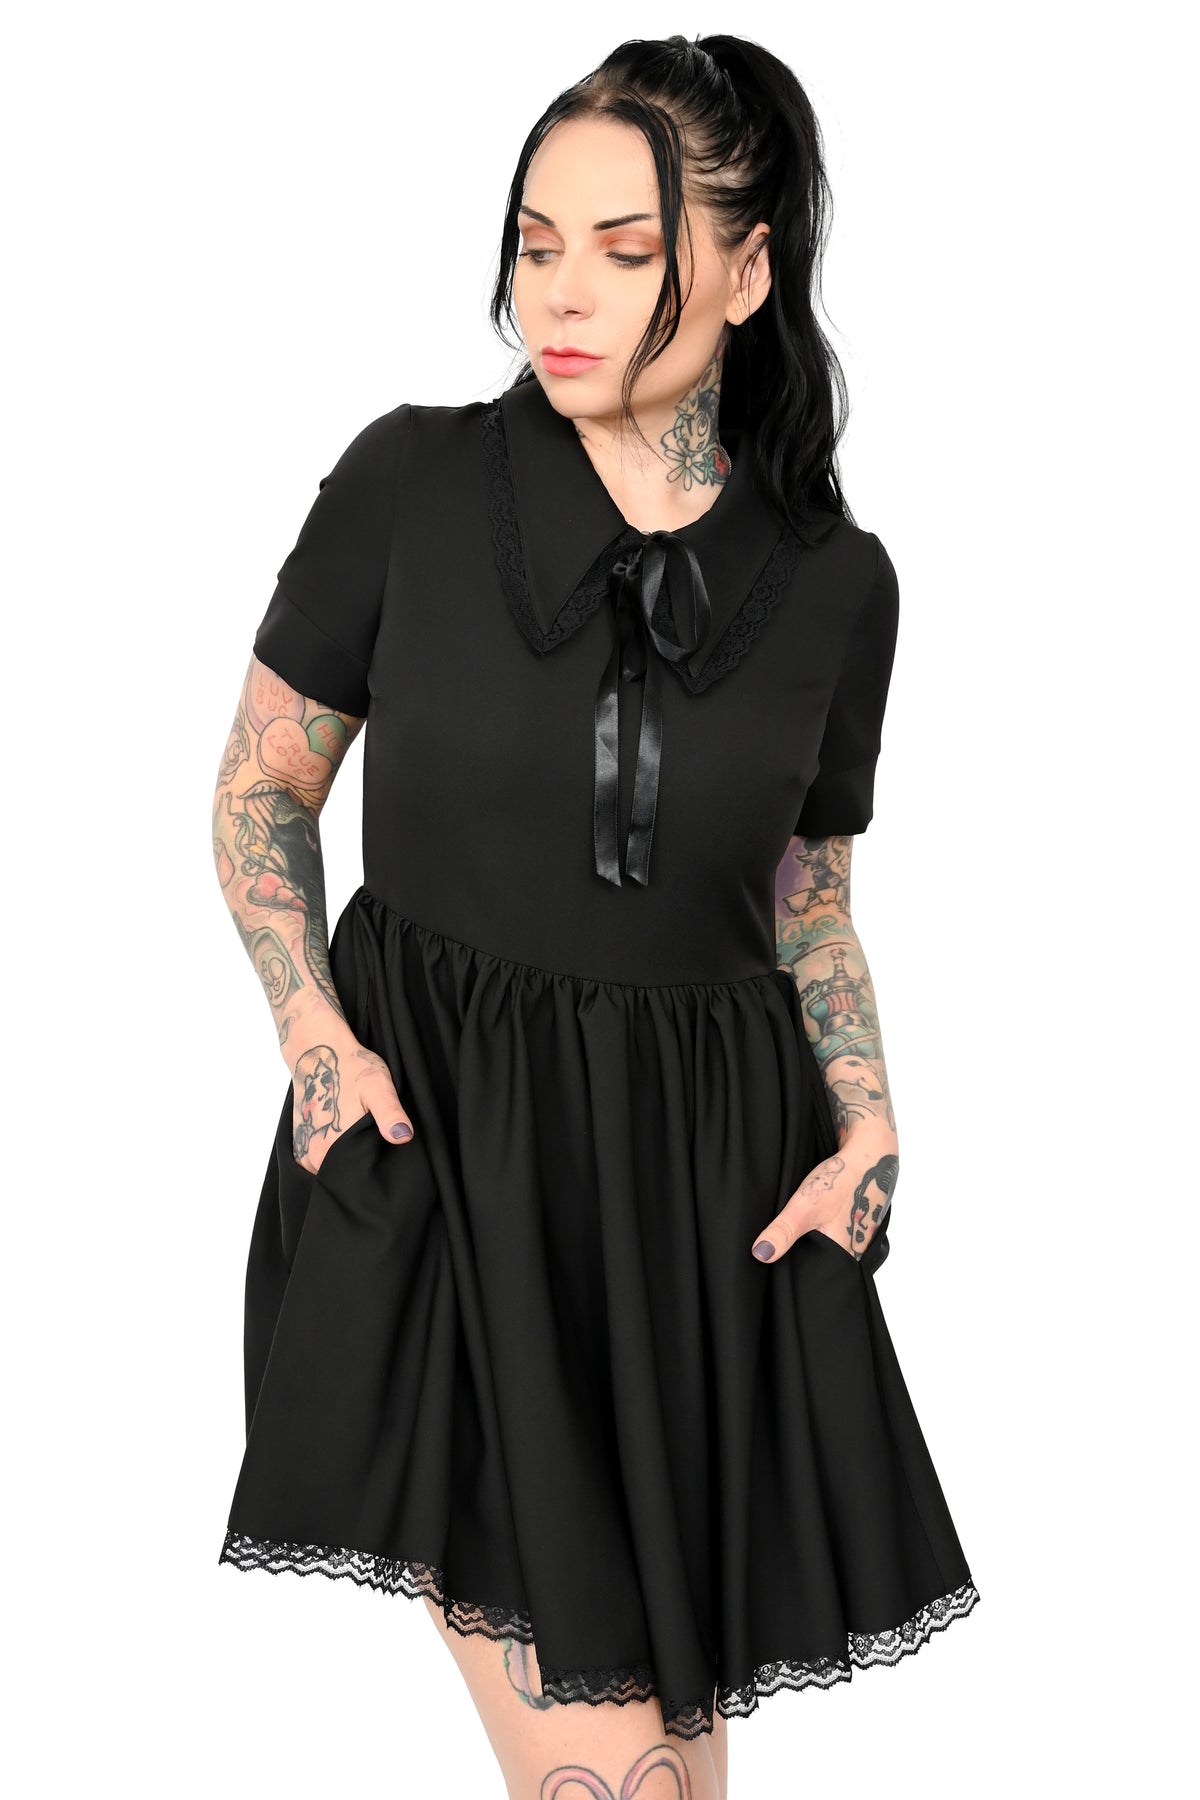 All Hallow's Eve Dress - Size Small left! (Would fit a medium)